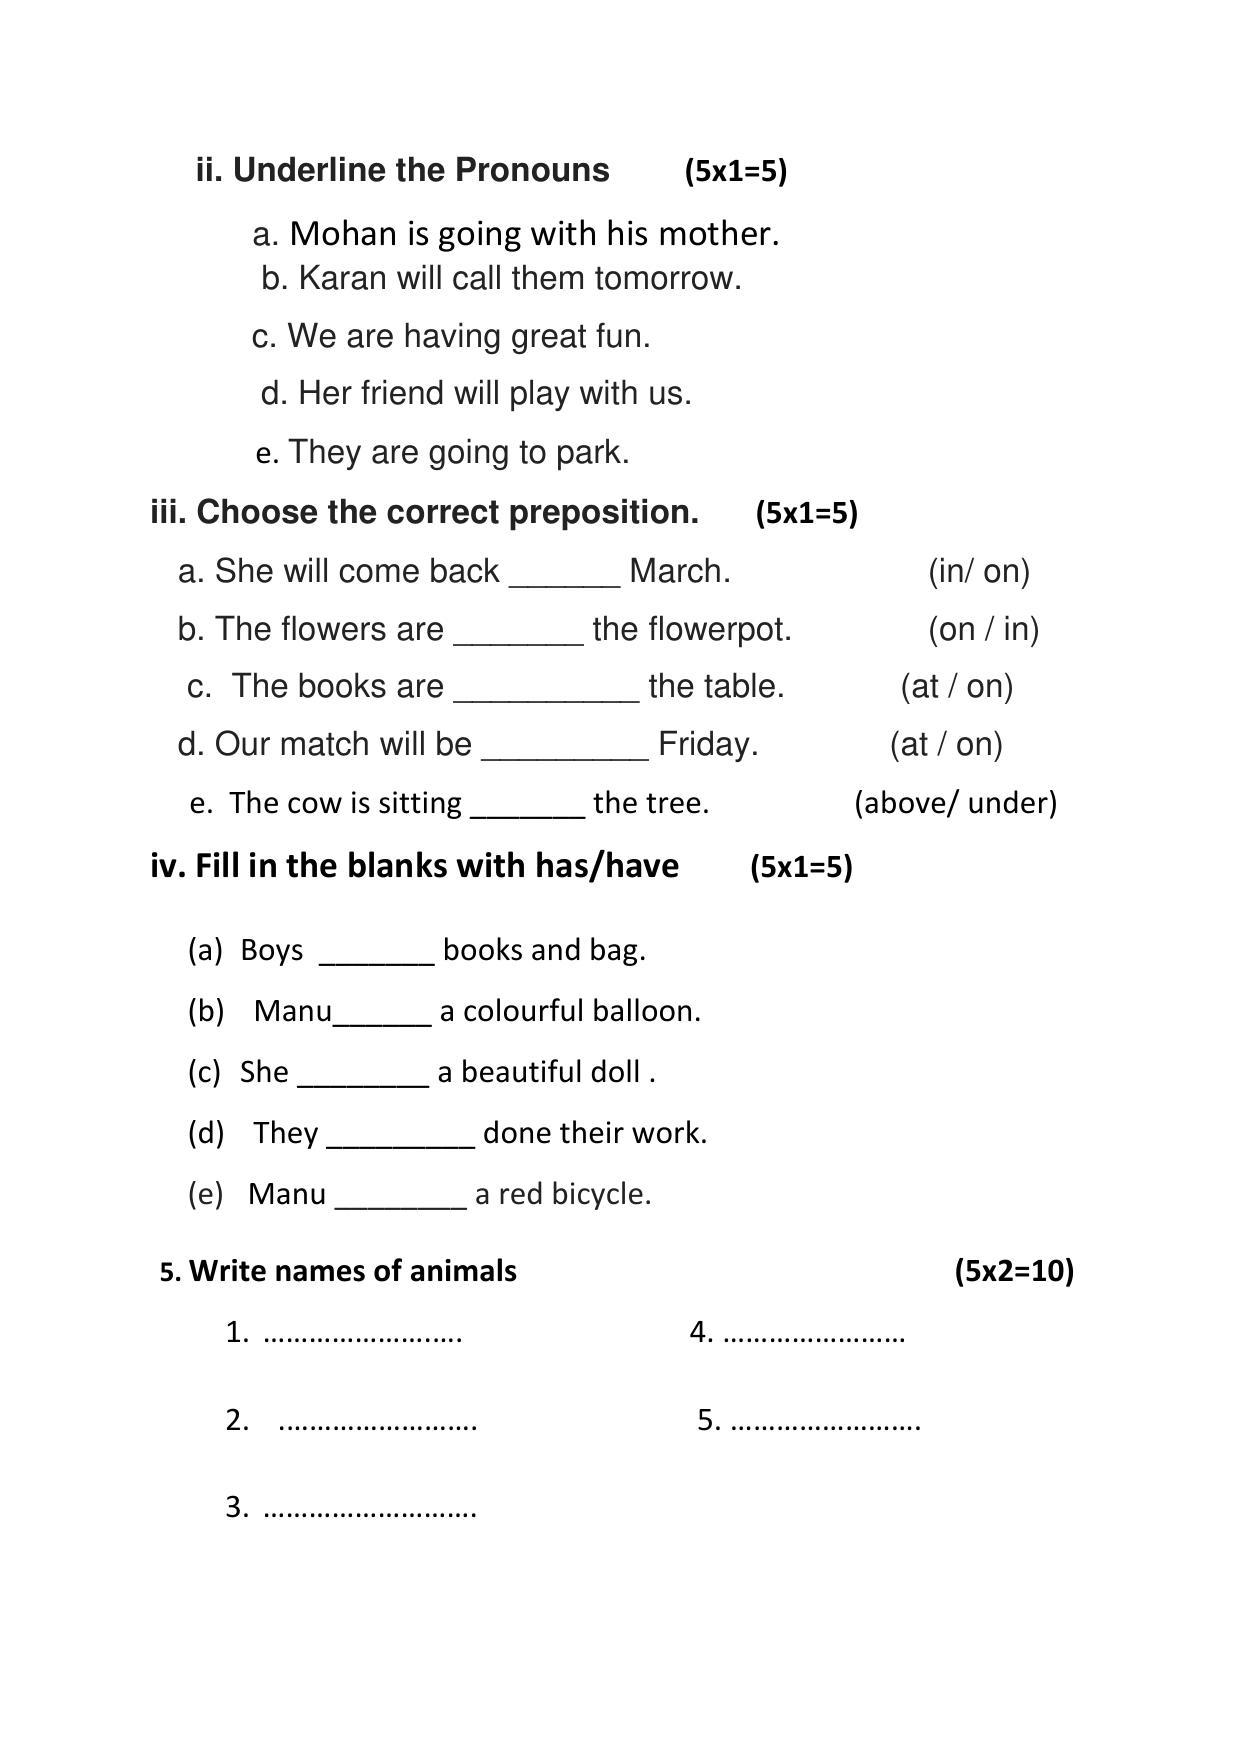 PSEB Class 5 English (DA Students) Model Papers - Page 3